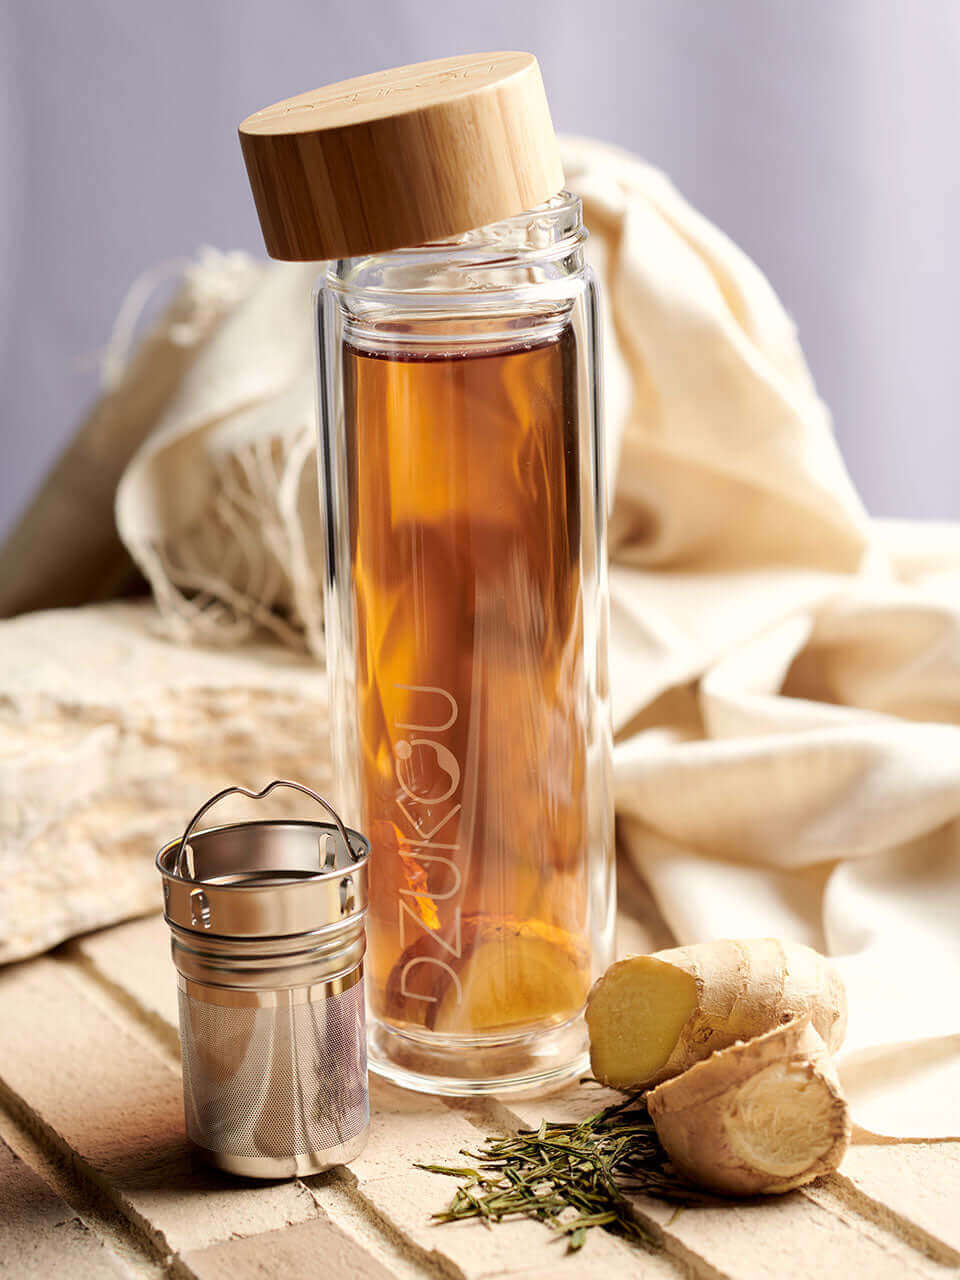 Glass bottle with infuser containing tea